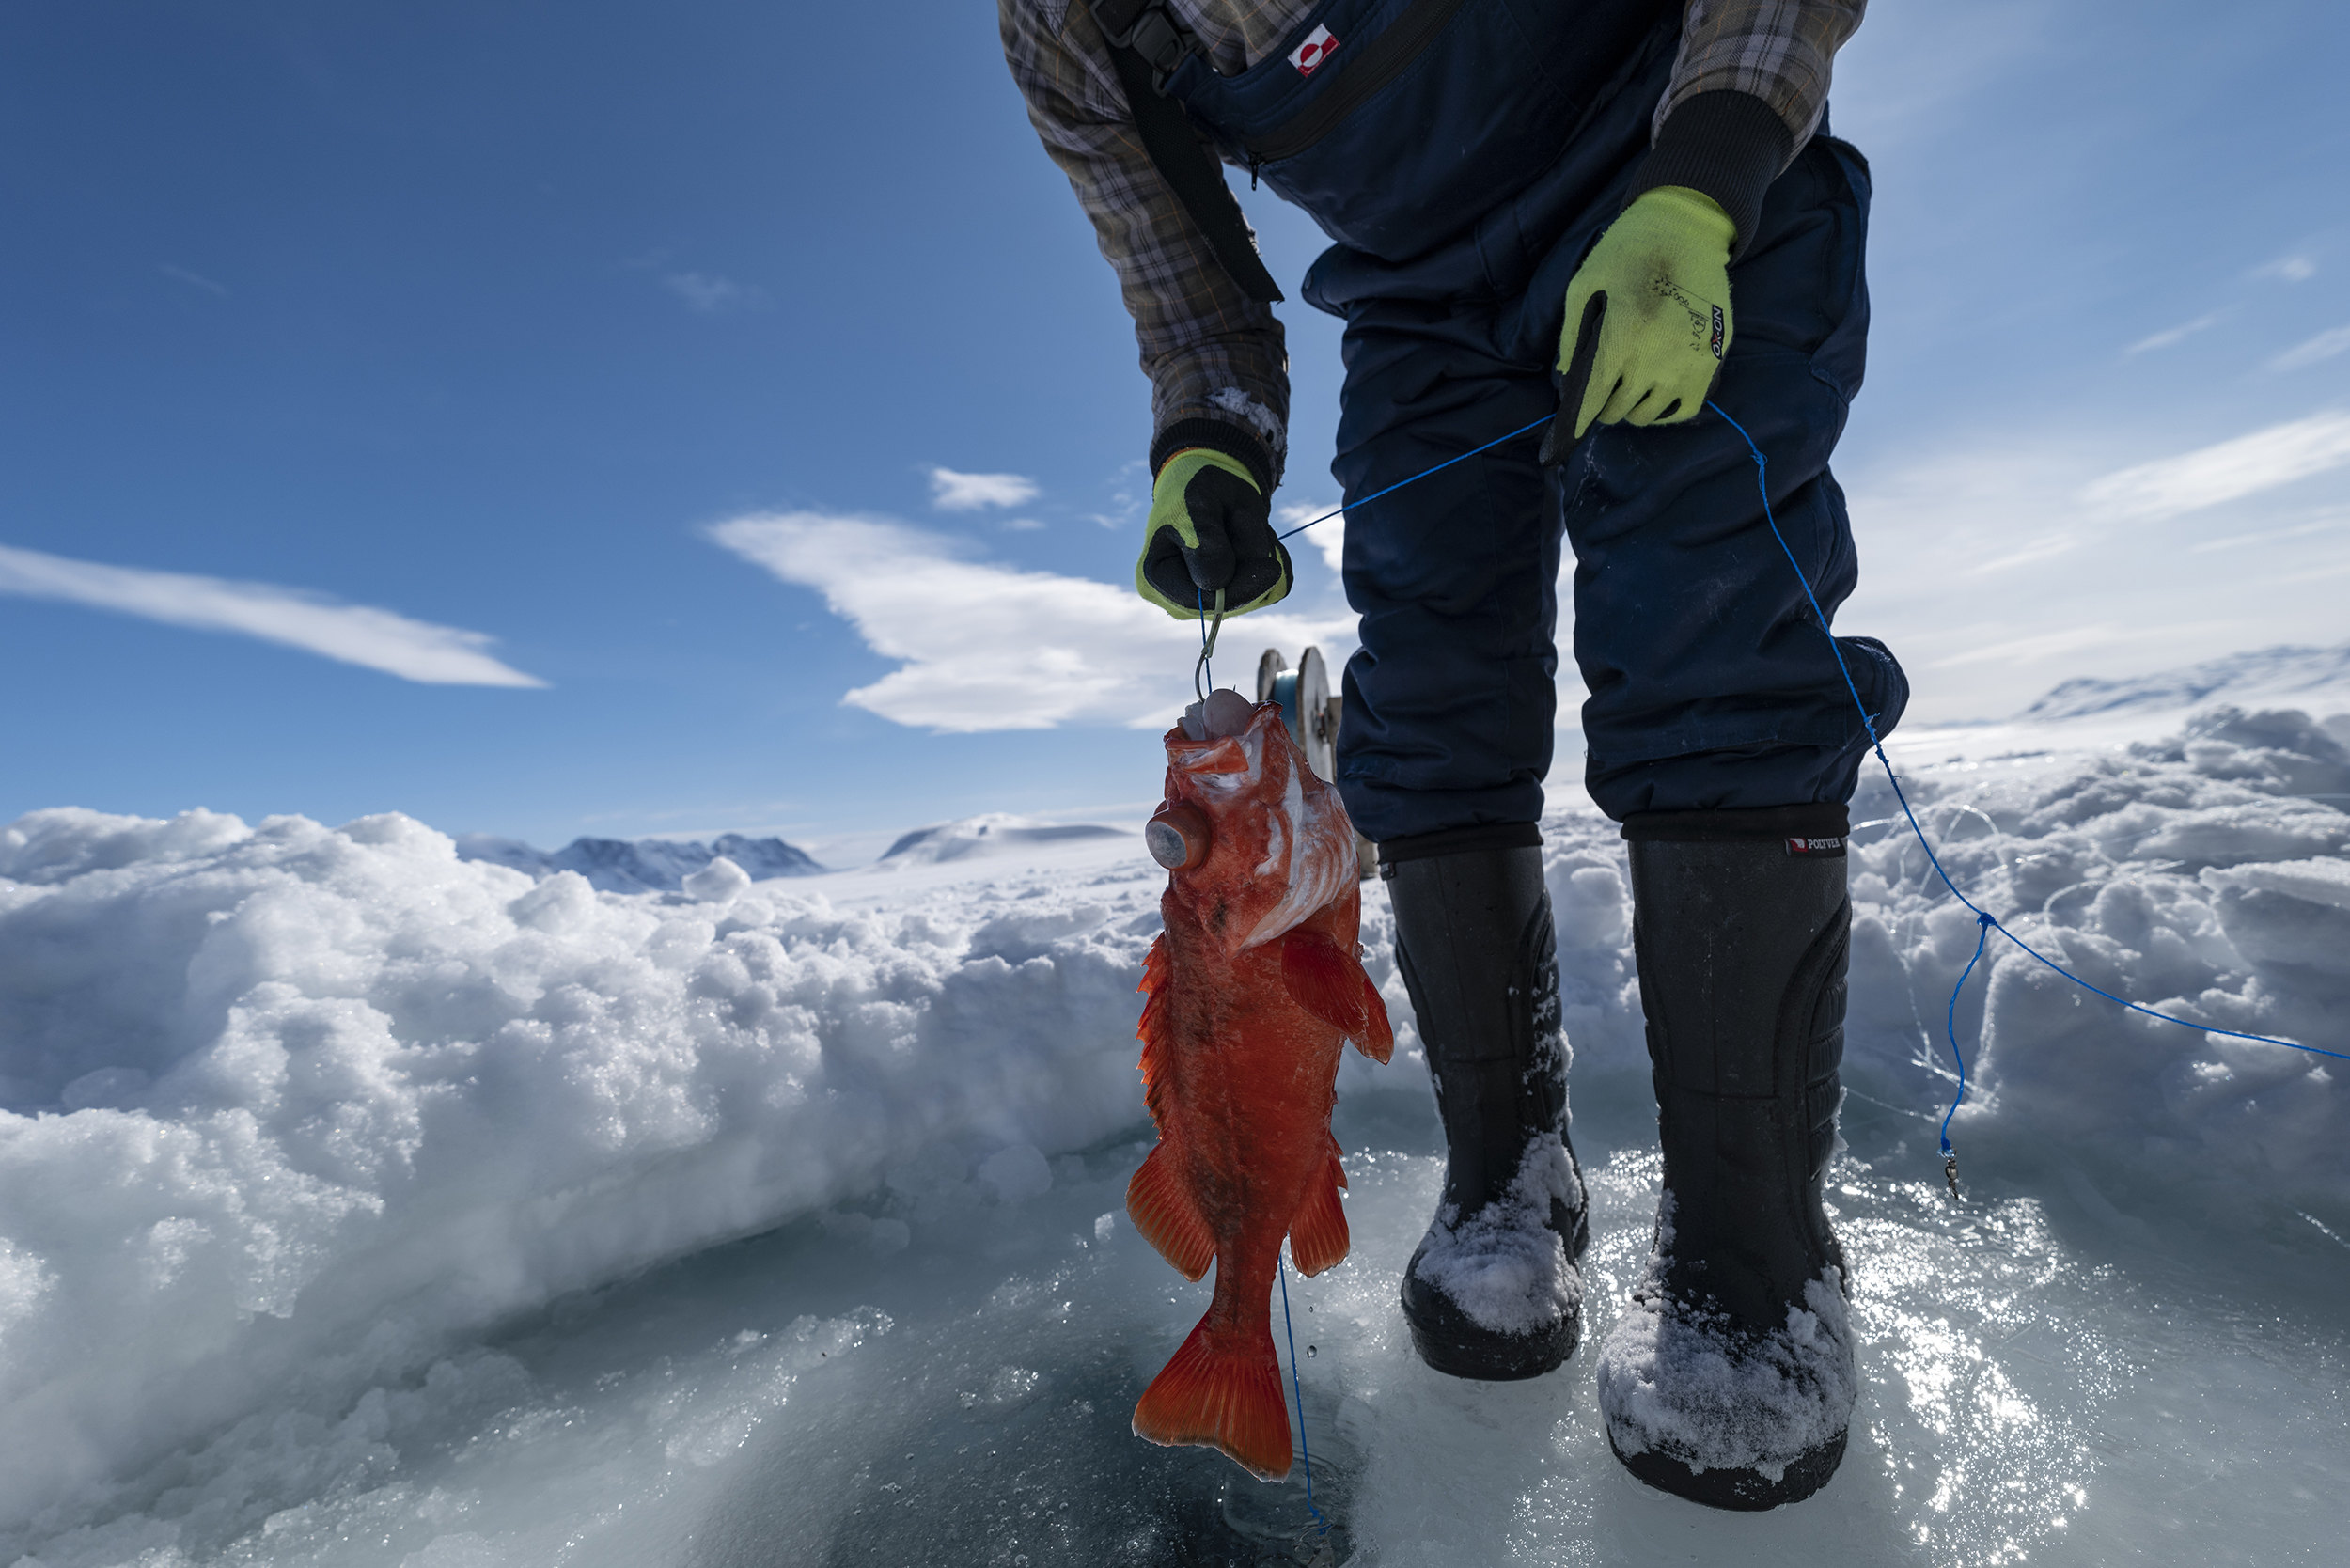 Icefishing on the frozen fjord - Photo by Carsten Egevang - Visit East Greenland